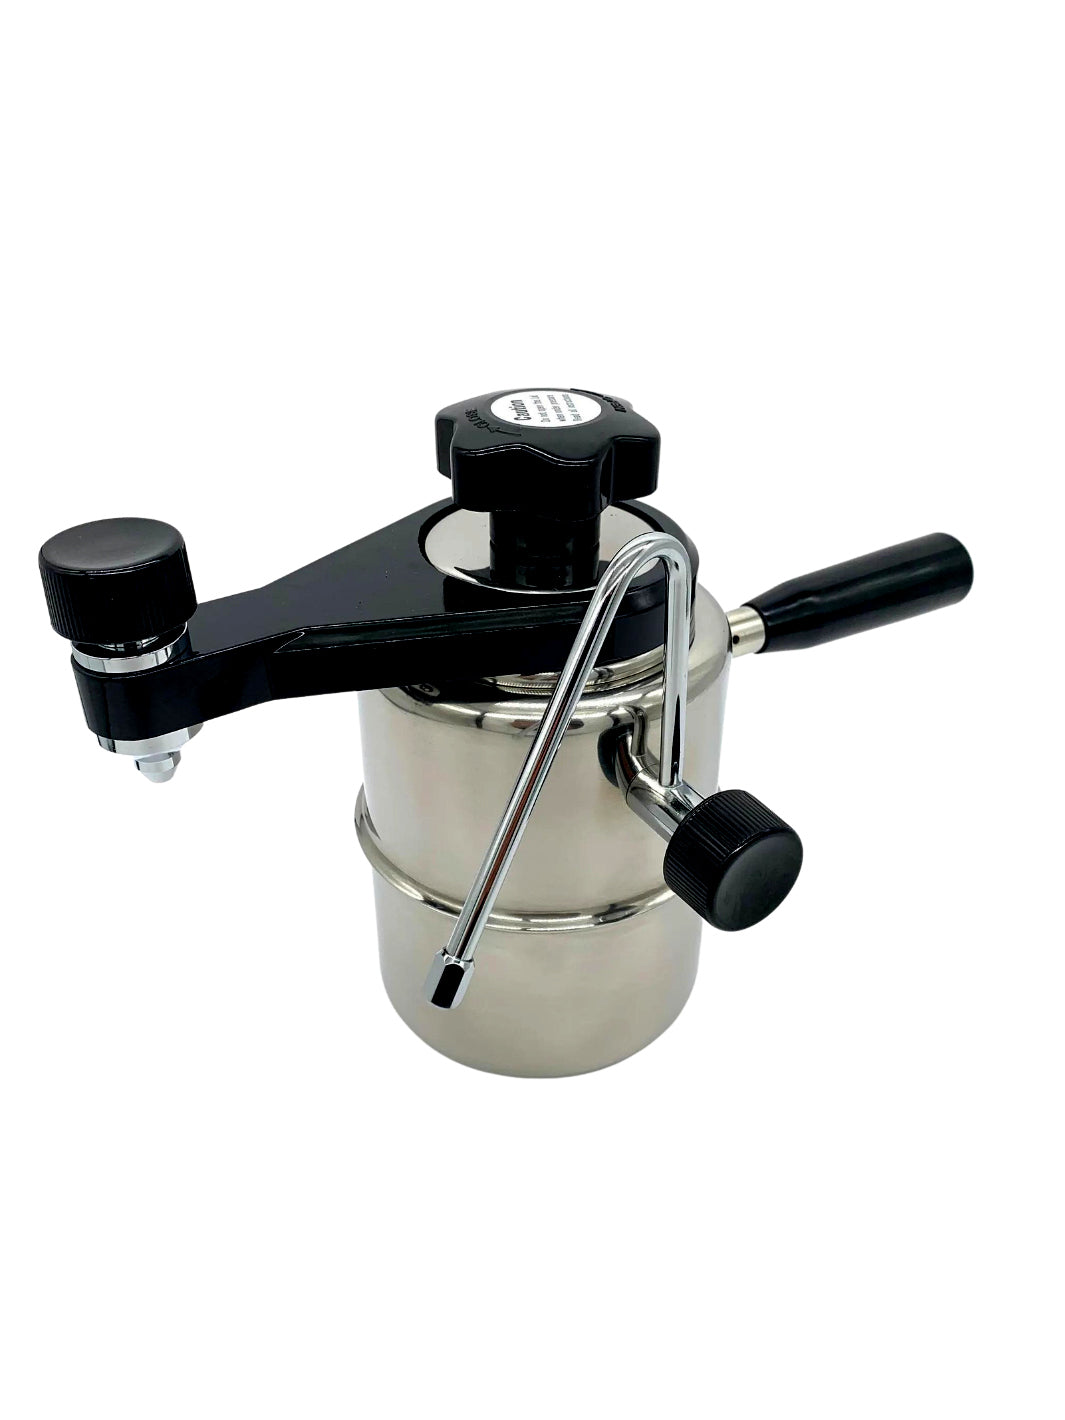 Bellman Coffee Maker  From £100 at